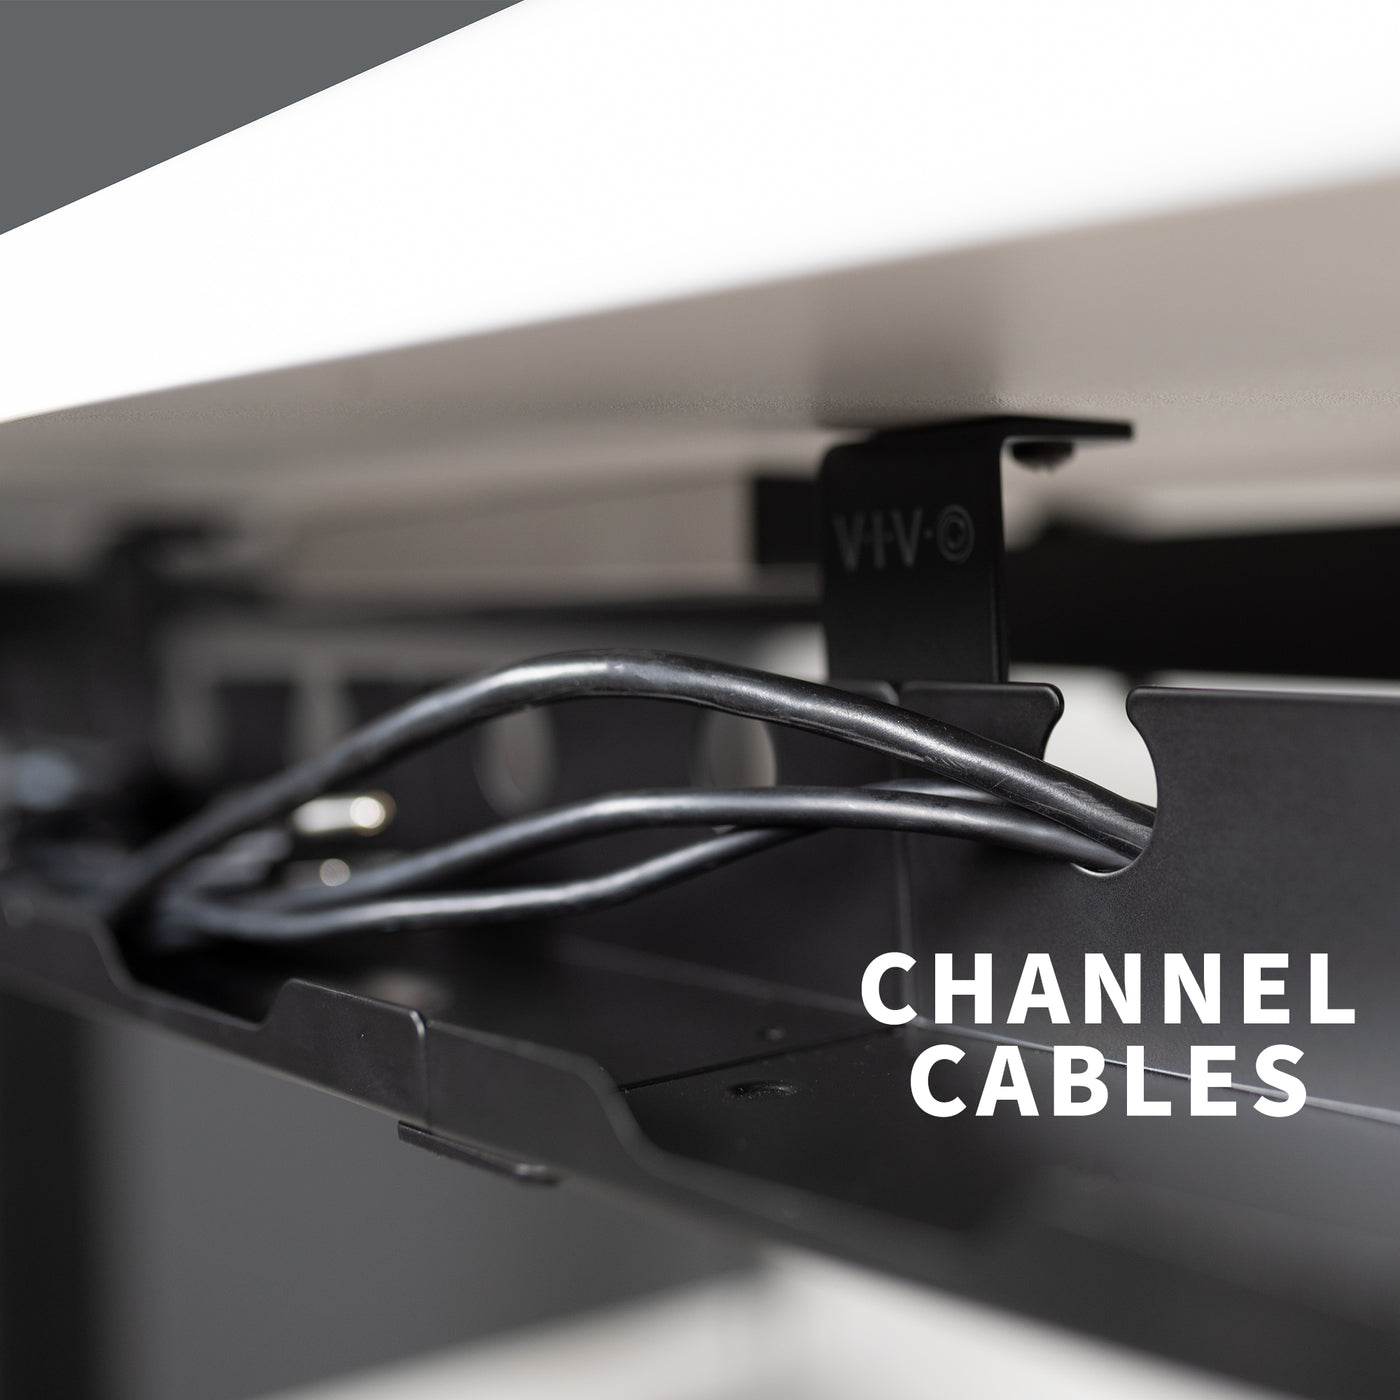 Channel cables through designated slots to avoid tangles during height adjustments.